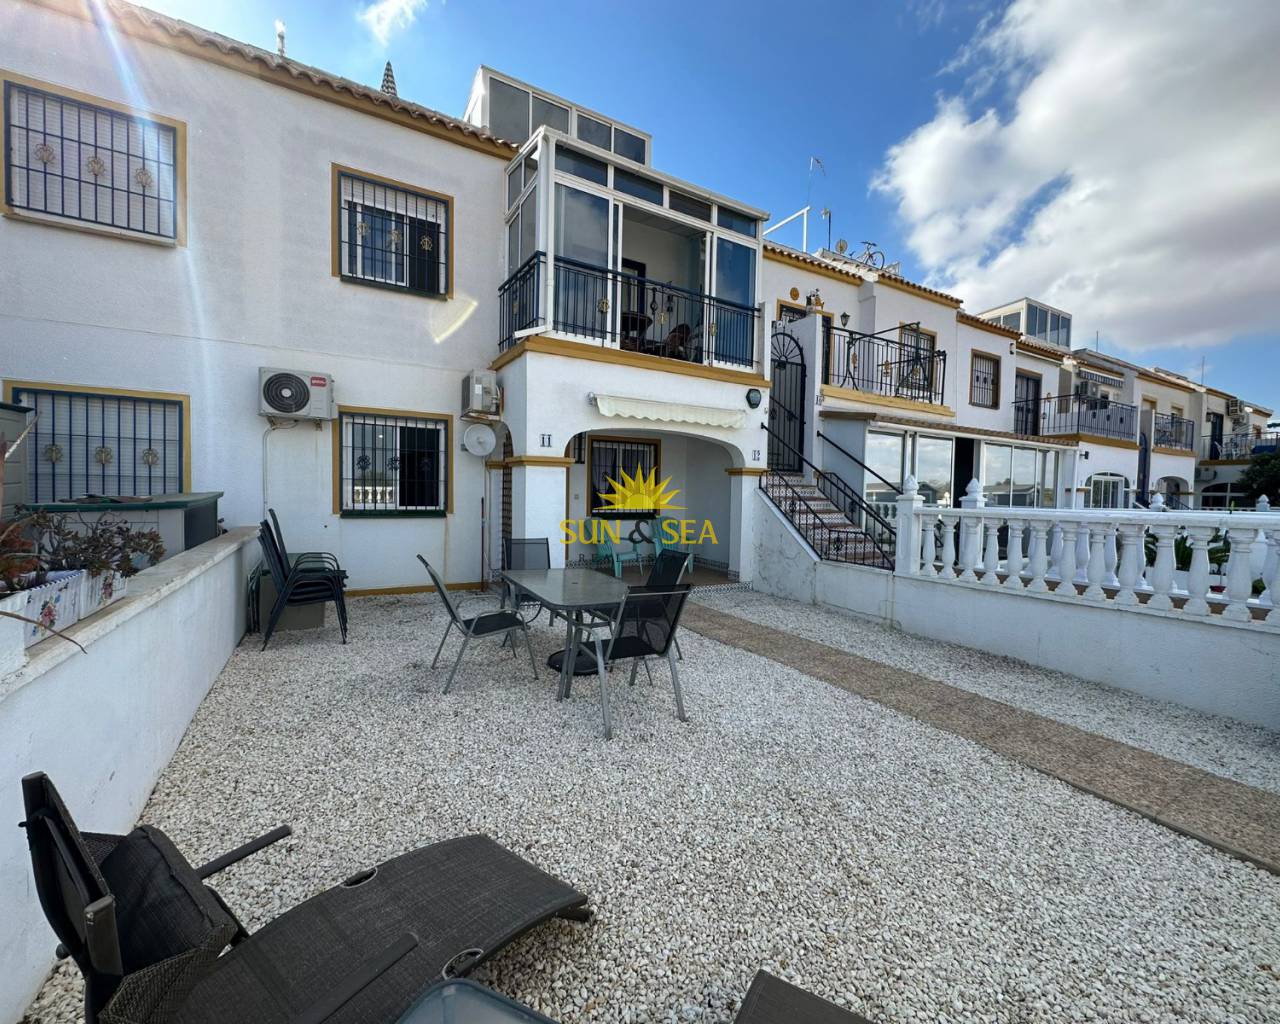 Townhouse - Long time Rental - Torrevieja - Carrefour